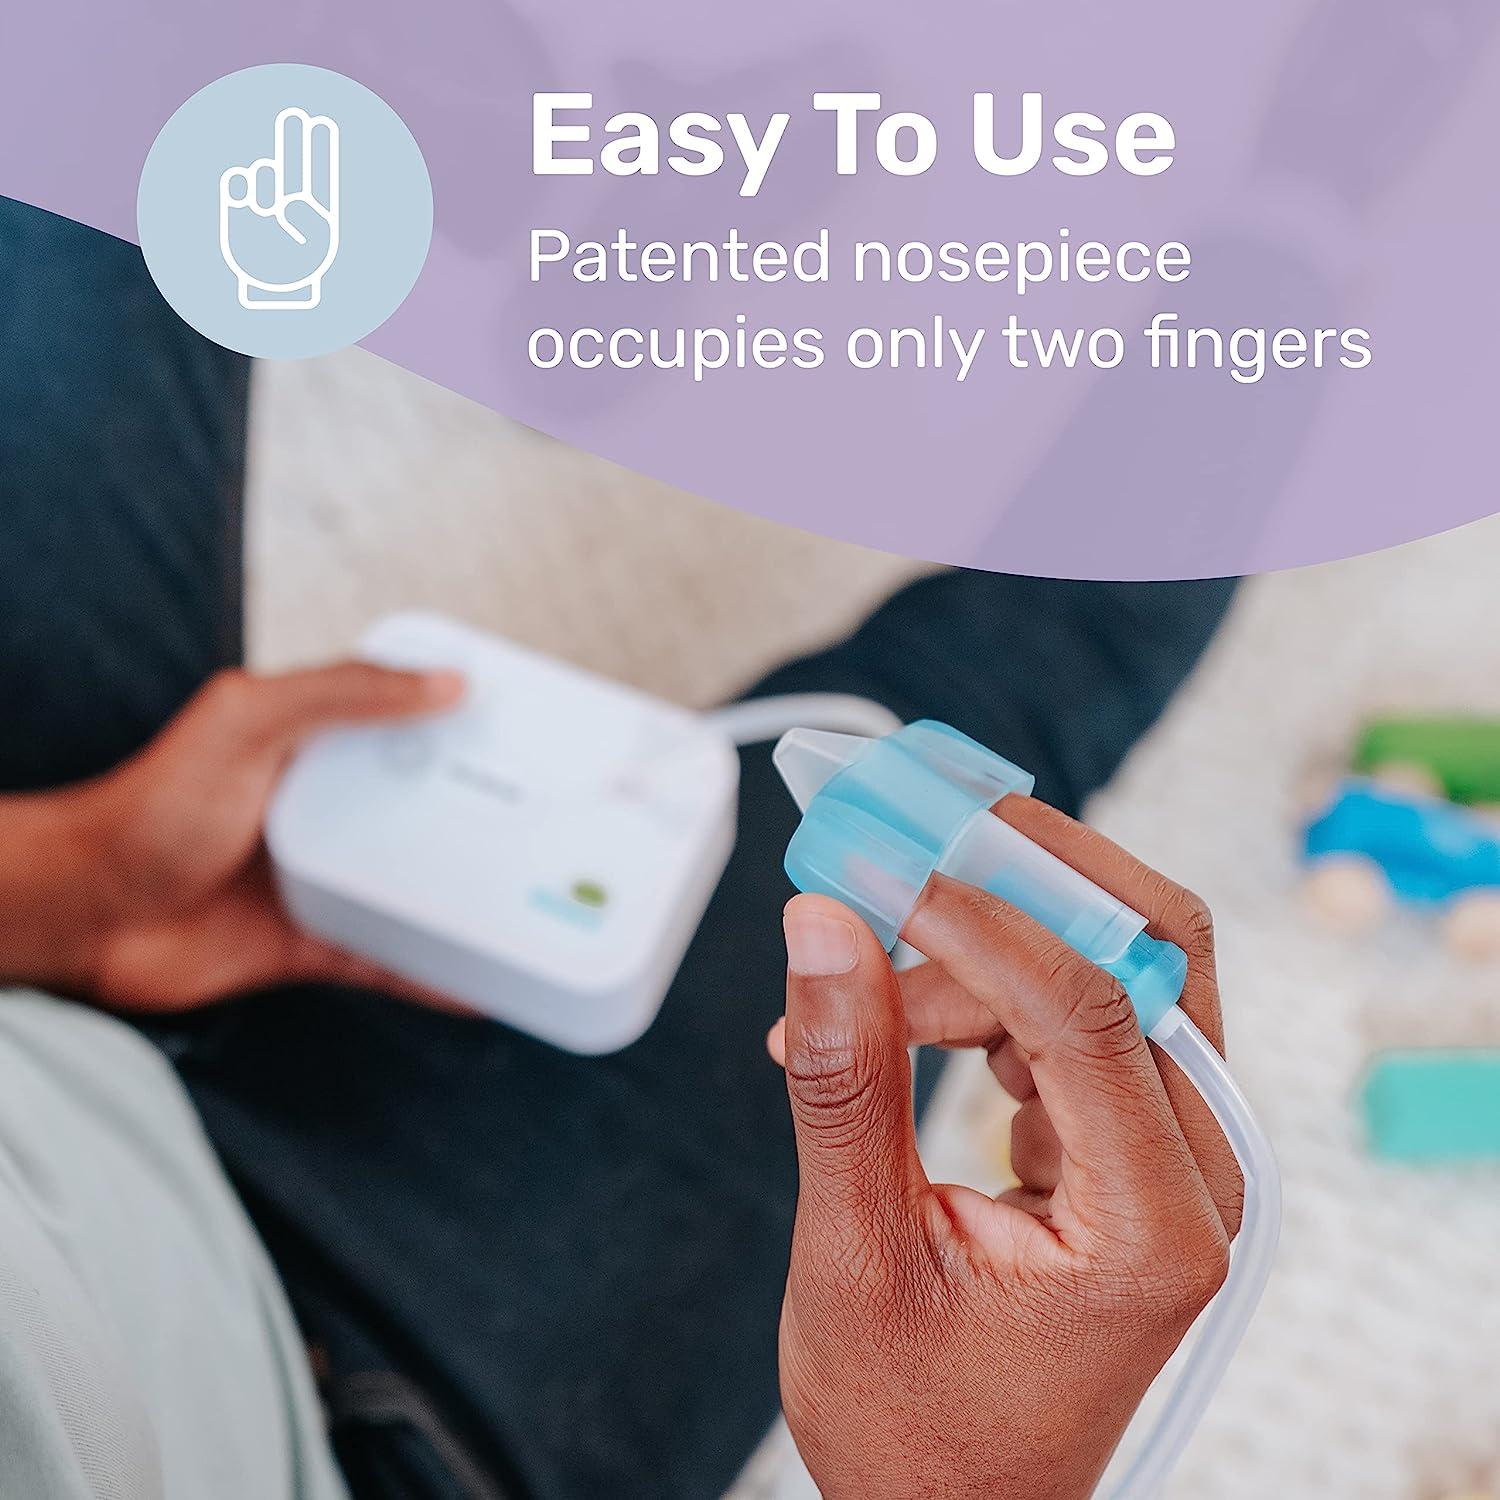  Electric Baby Nasal Aspirator, The NozeBot by Dr. Noze Best, Hospital Grade Suction, Nasal Vacuum